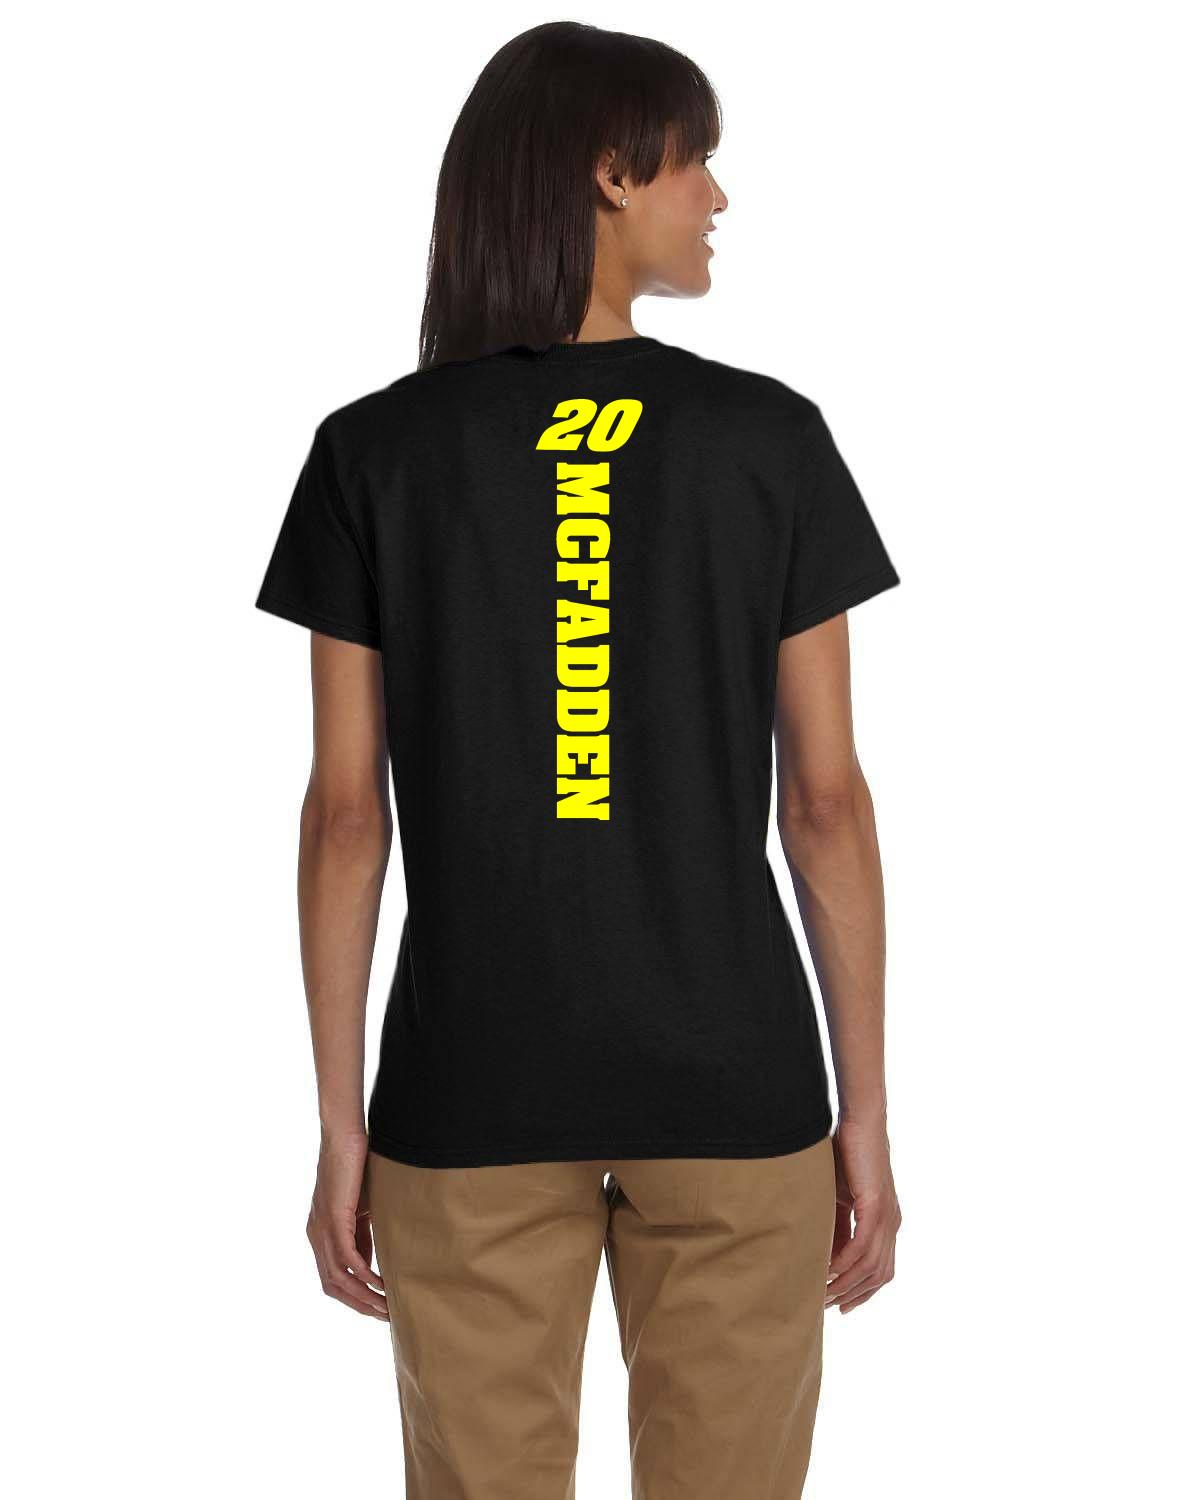 Cole McFadden / Grassroots Racing Name/number Ladies tshirt